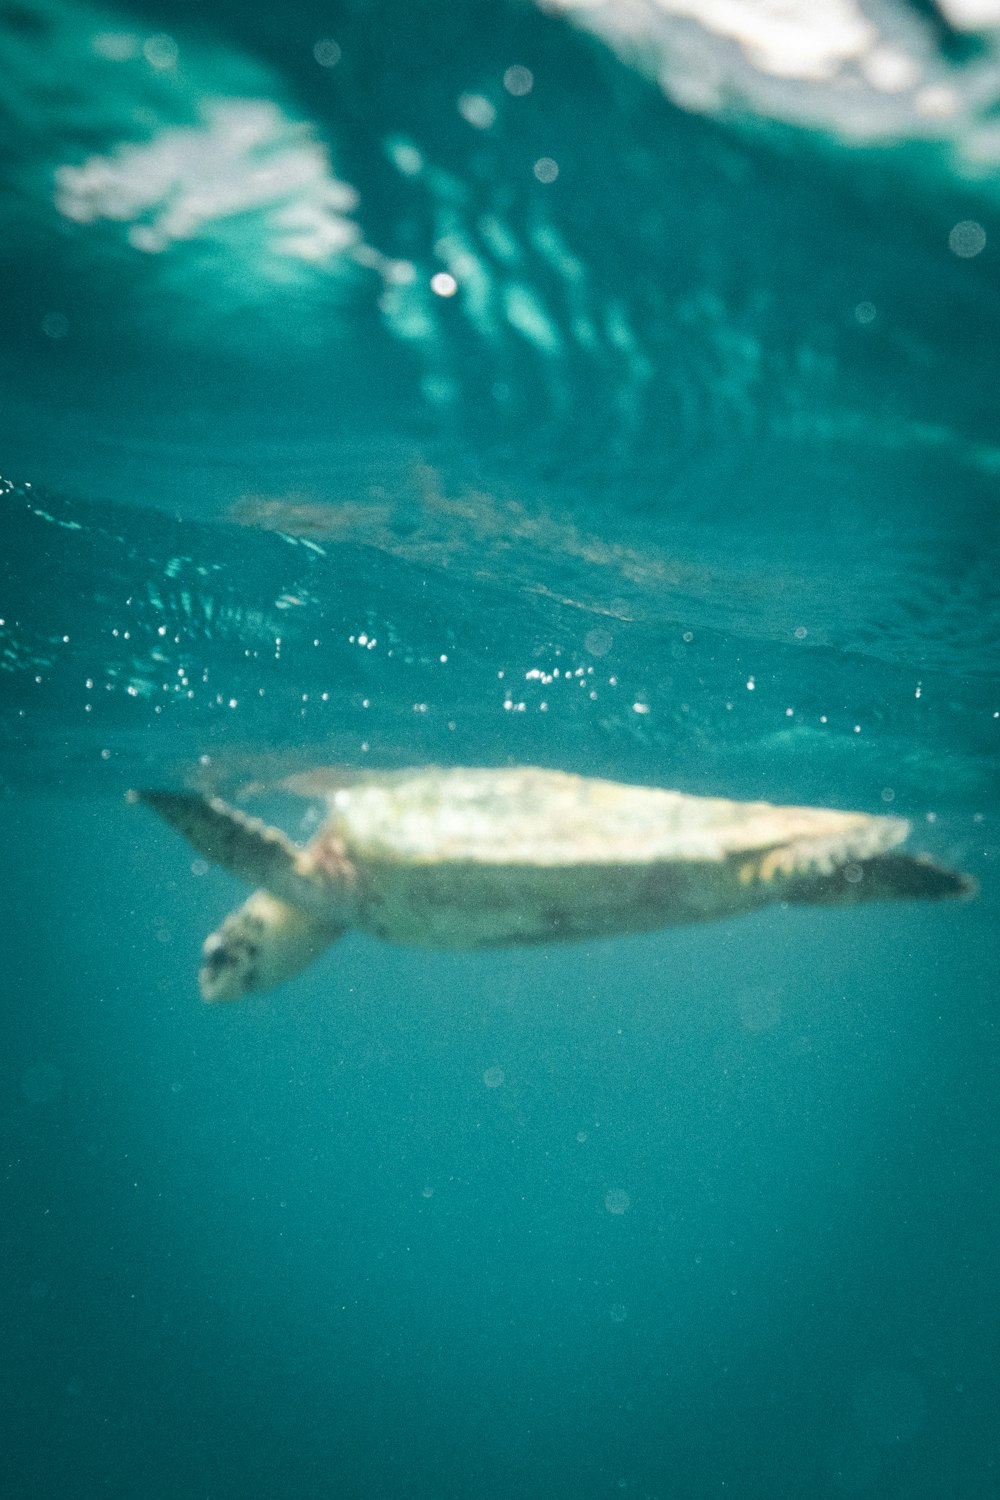 a turtle swims in the ocean water